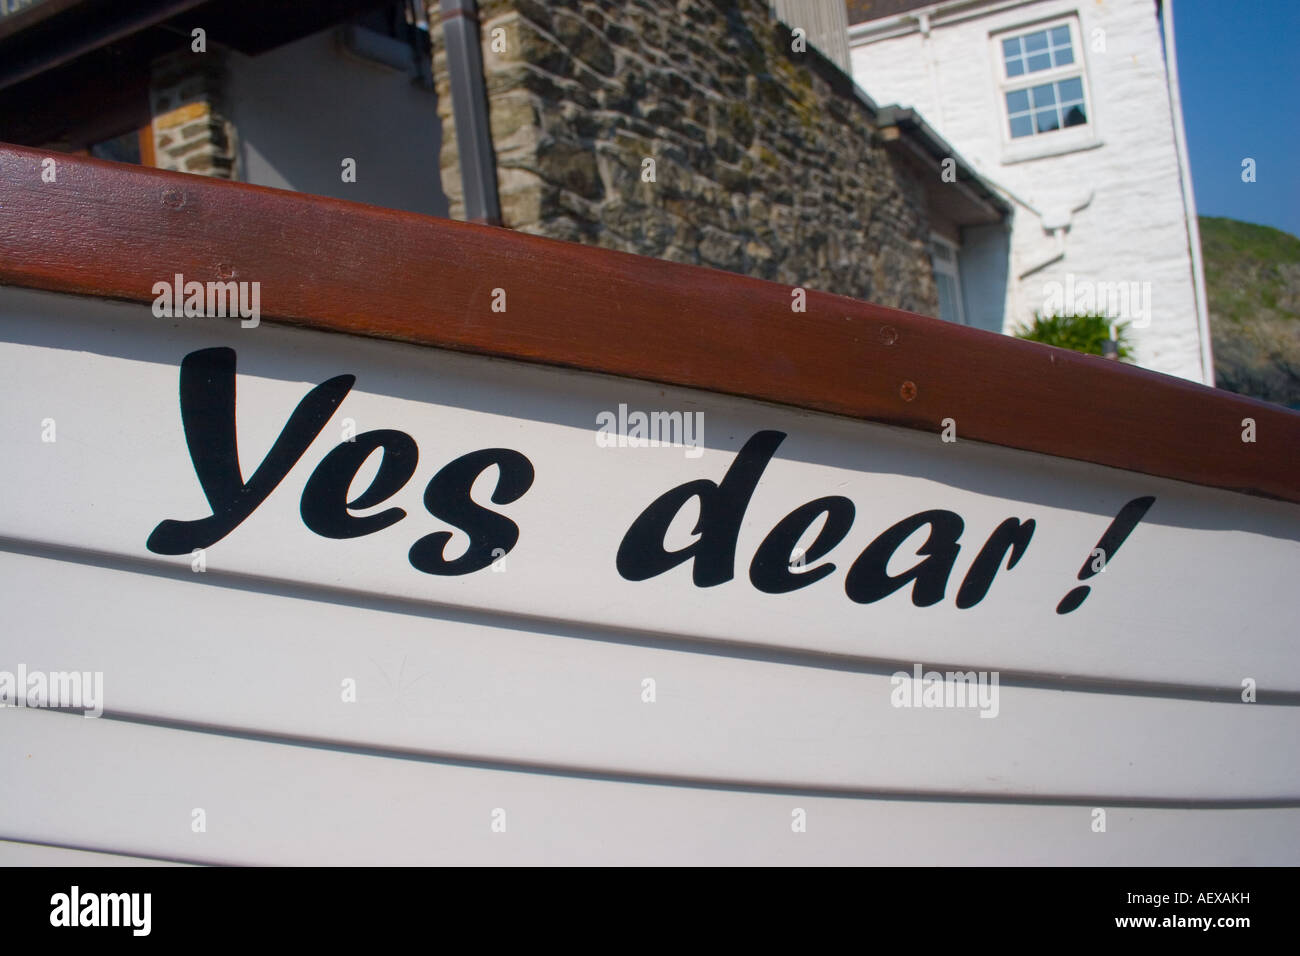 Yes Dear name of a boat Stock Photo